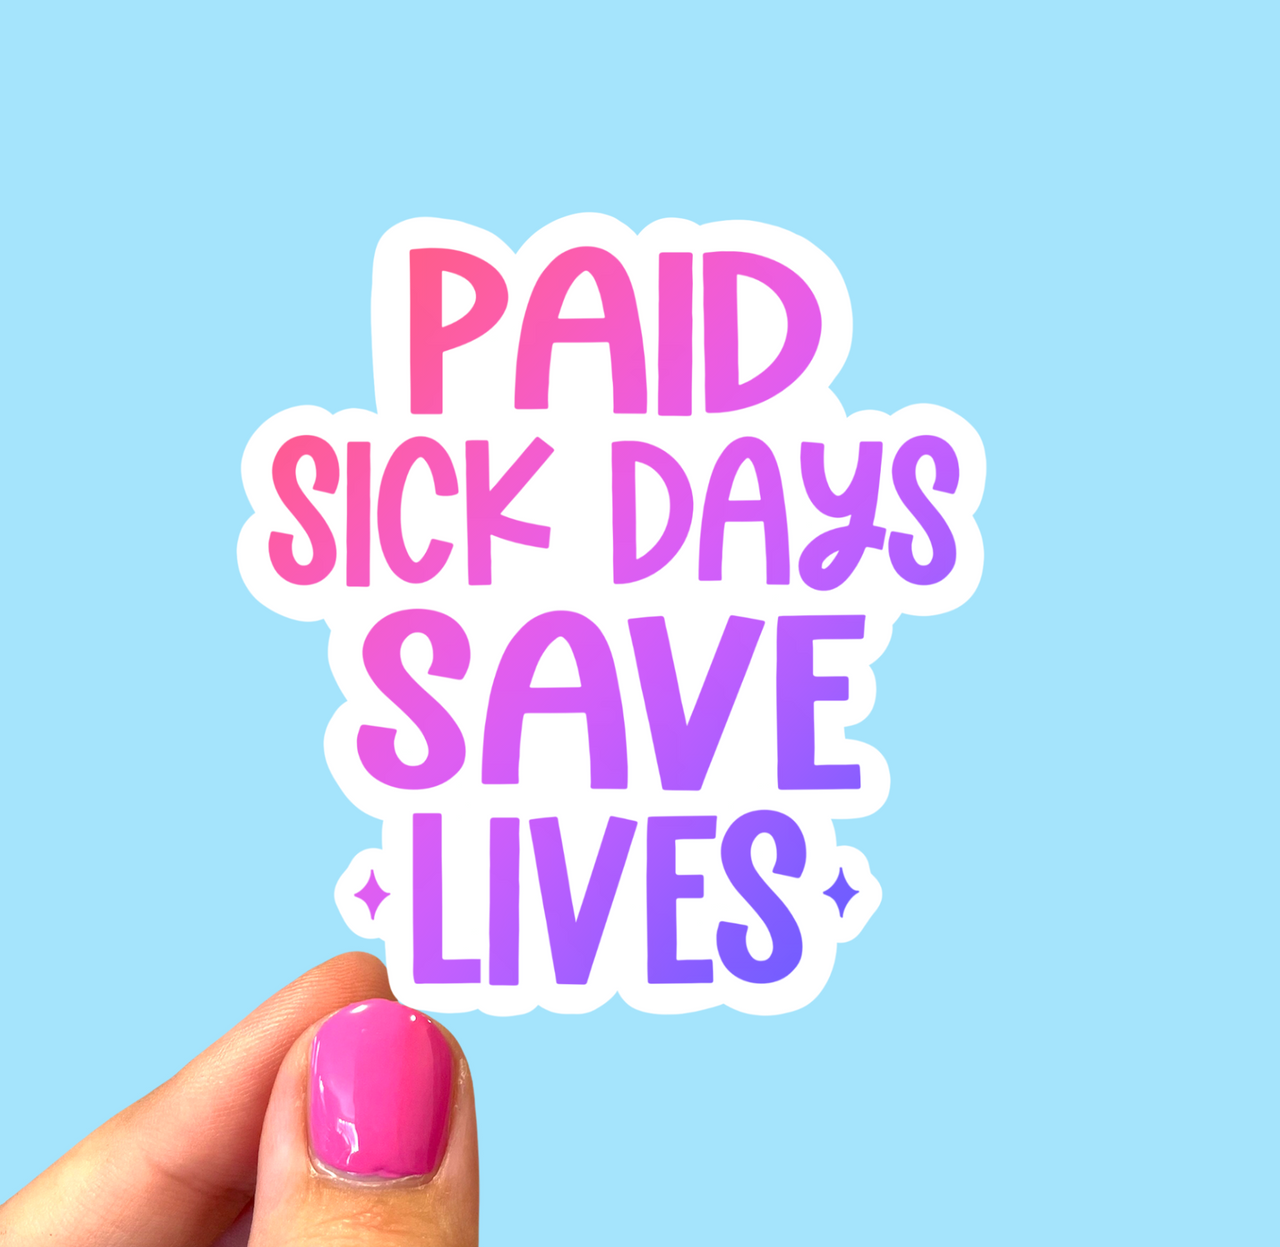 Paid sick days save lives